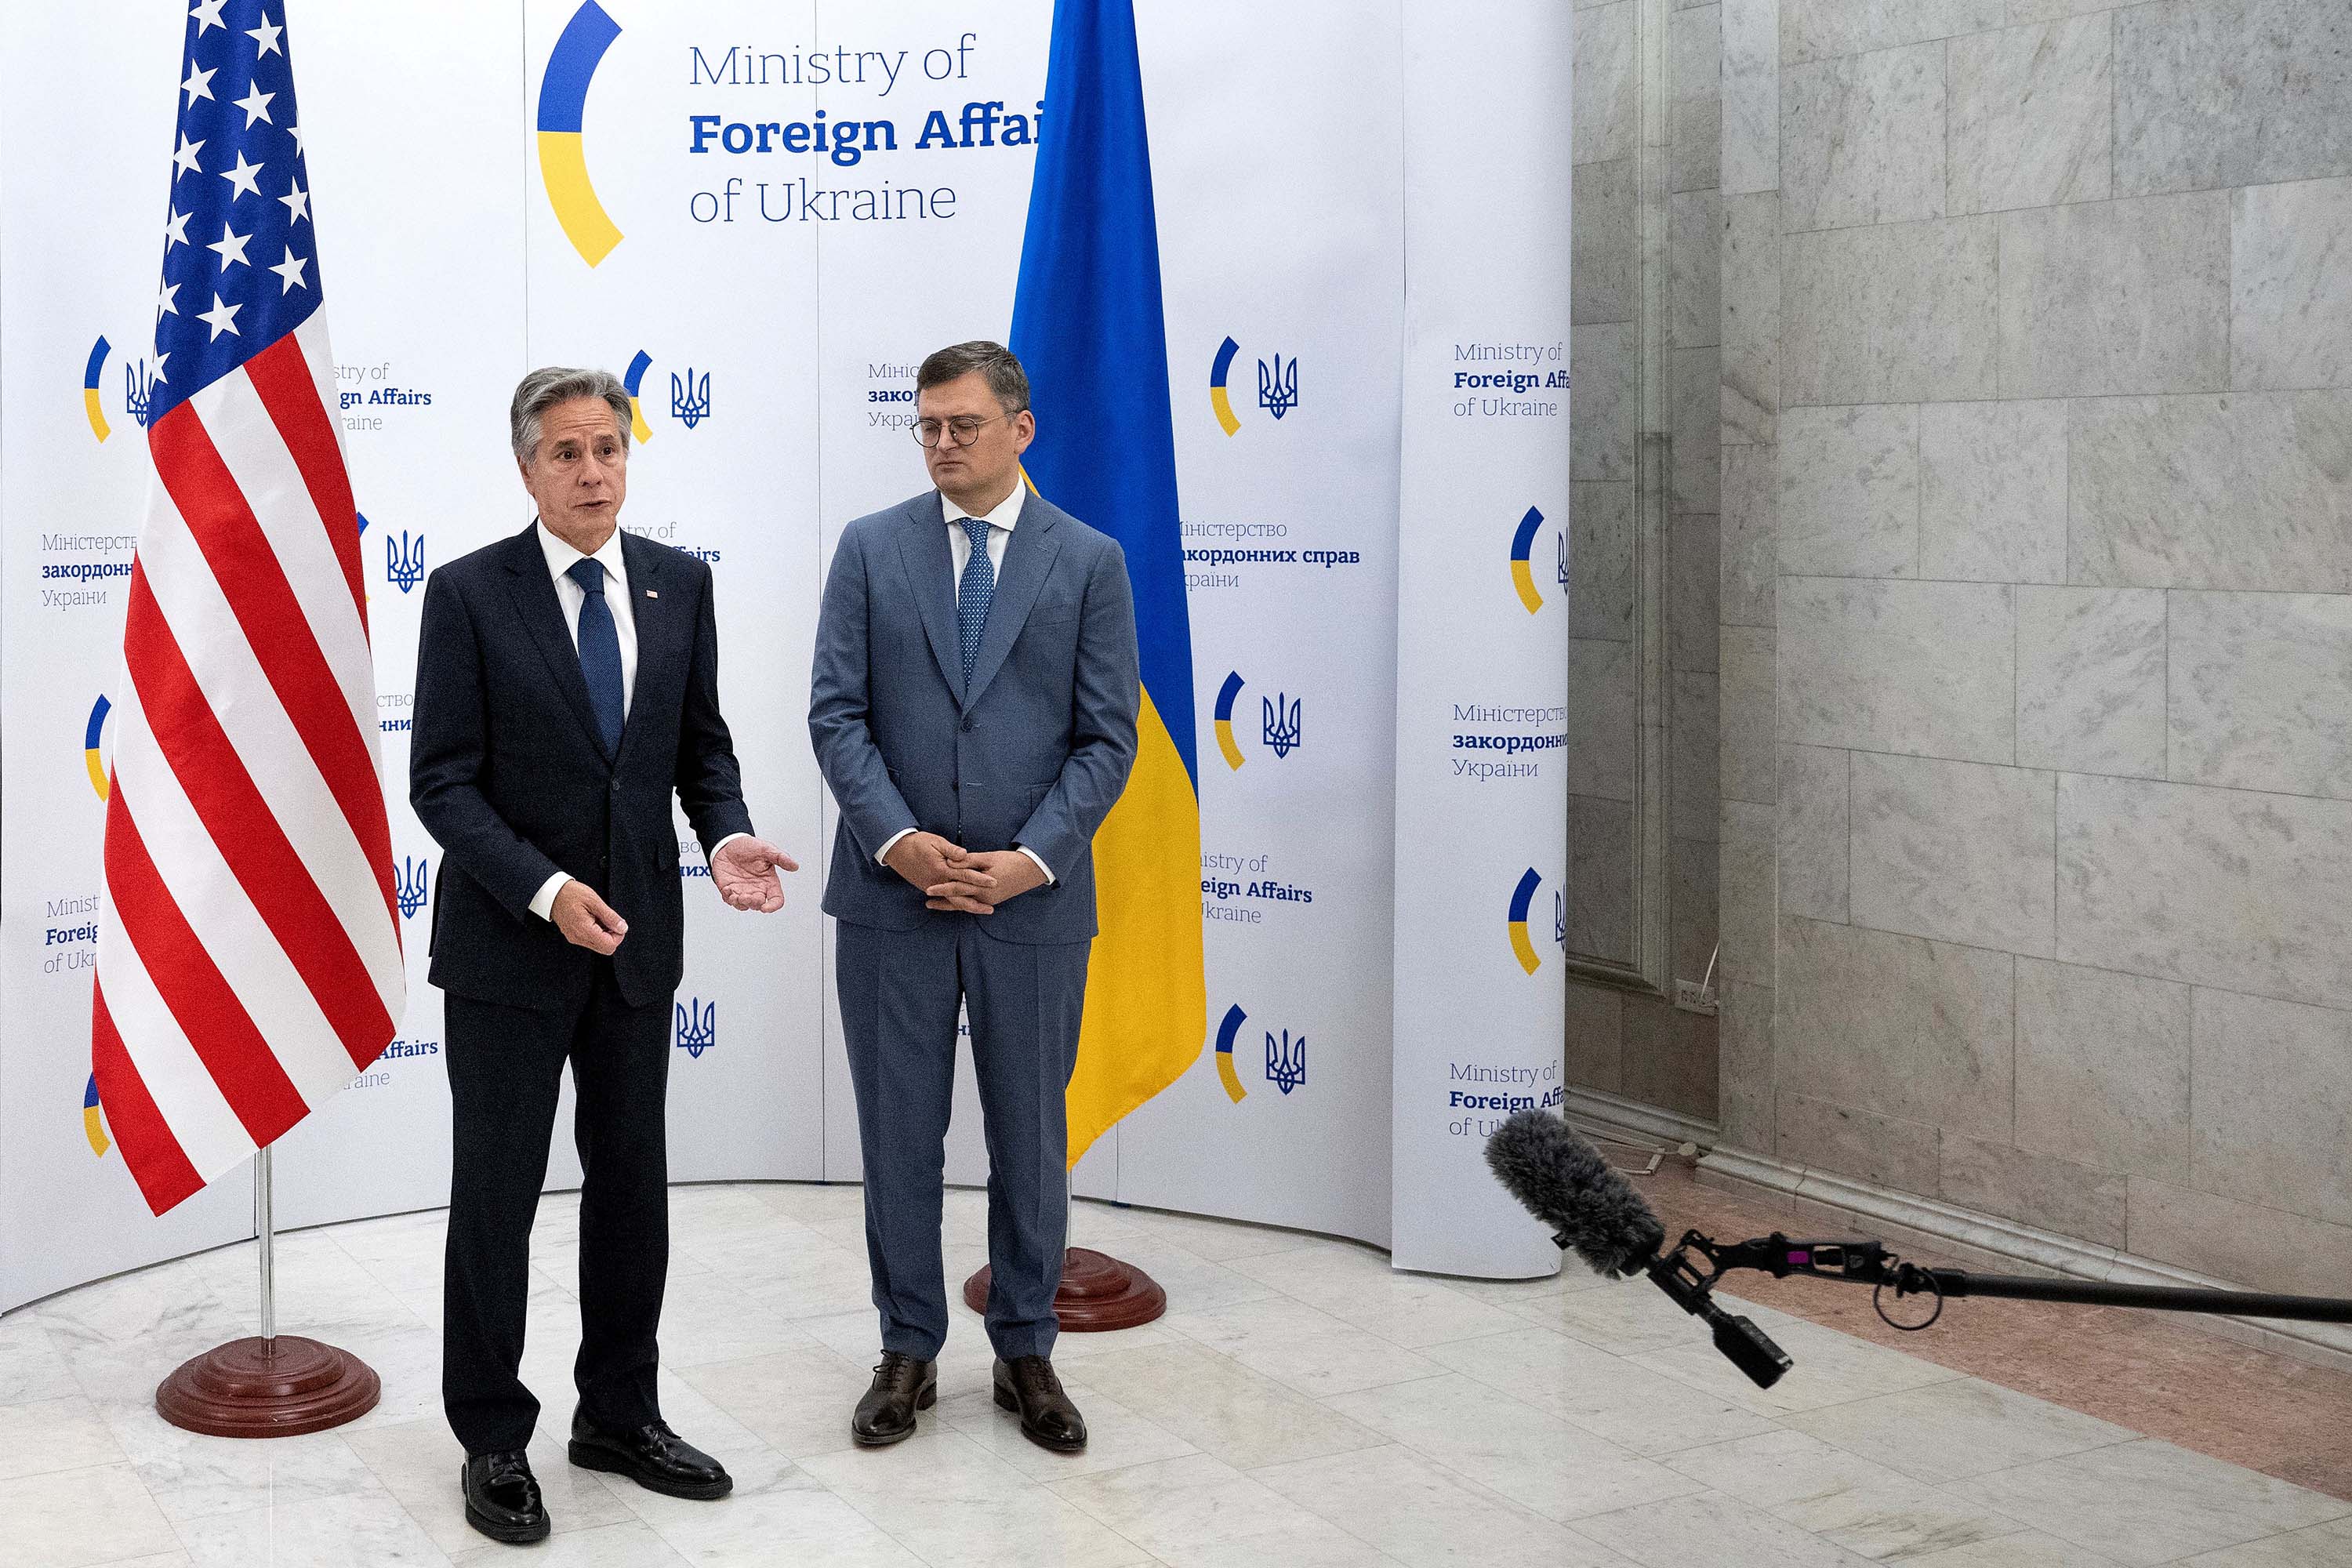 US Secretary of State Antony Blinken makes a statement alongside Ukraine's Foreign Minister Dmytro Kuleba, ahead of their meeting at the Ministry of Foreign Affairs in Kyiv, on Wednesday, September 6. 